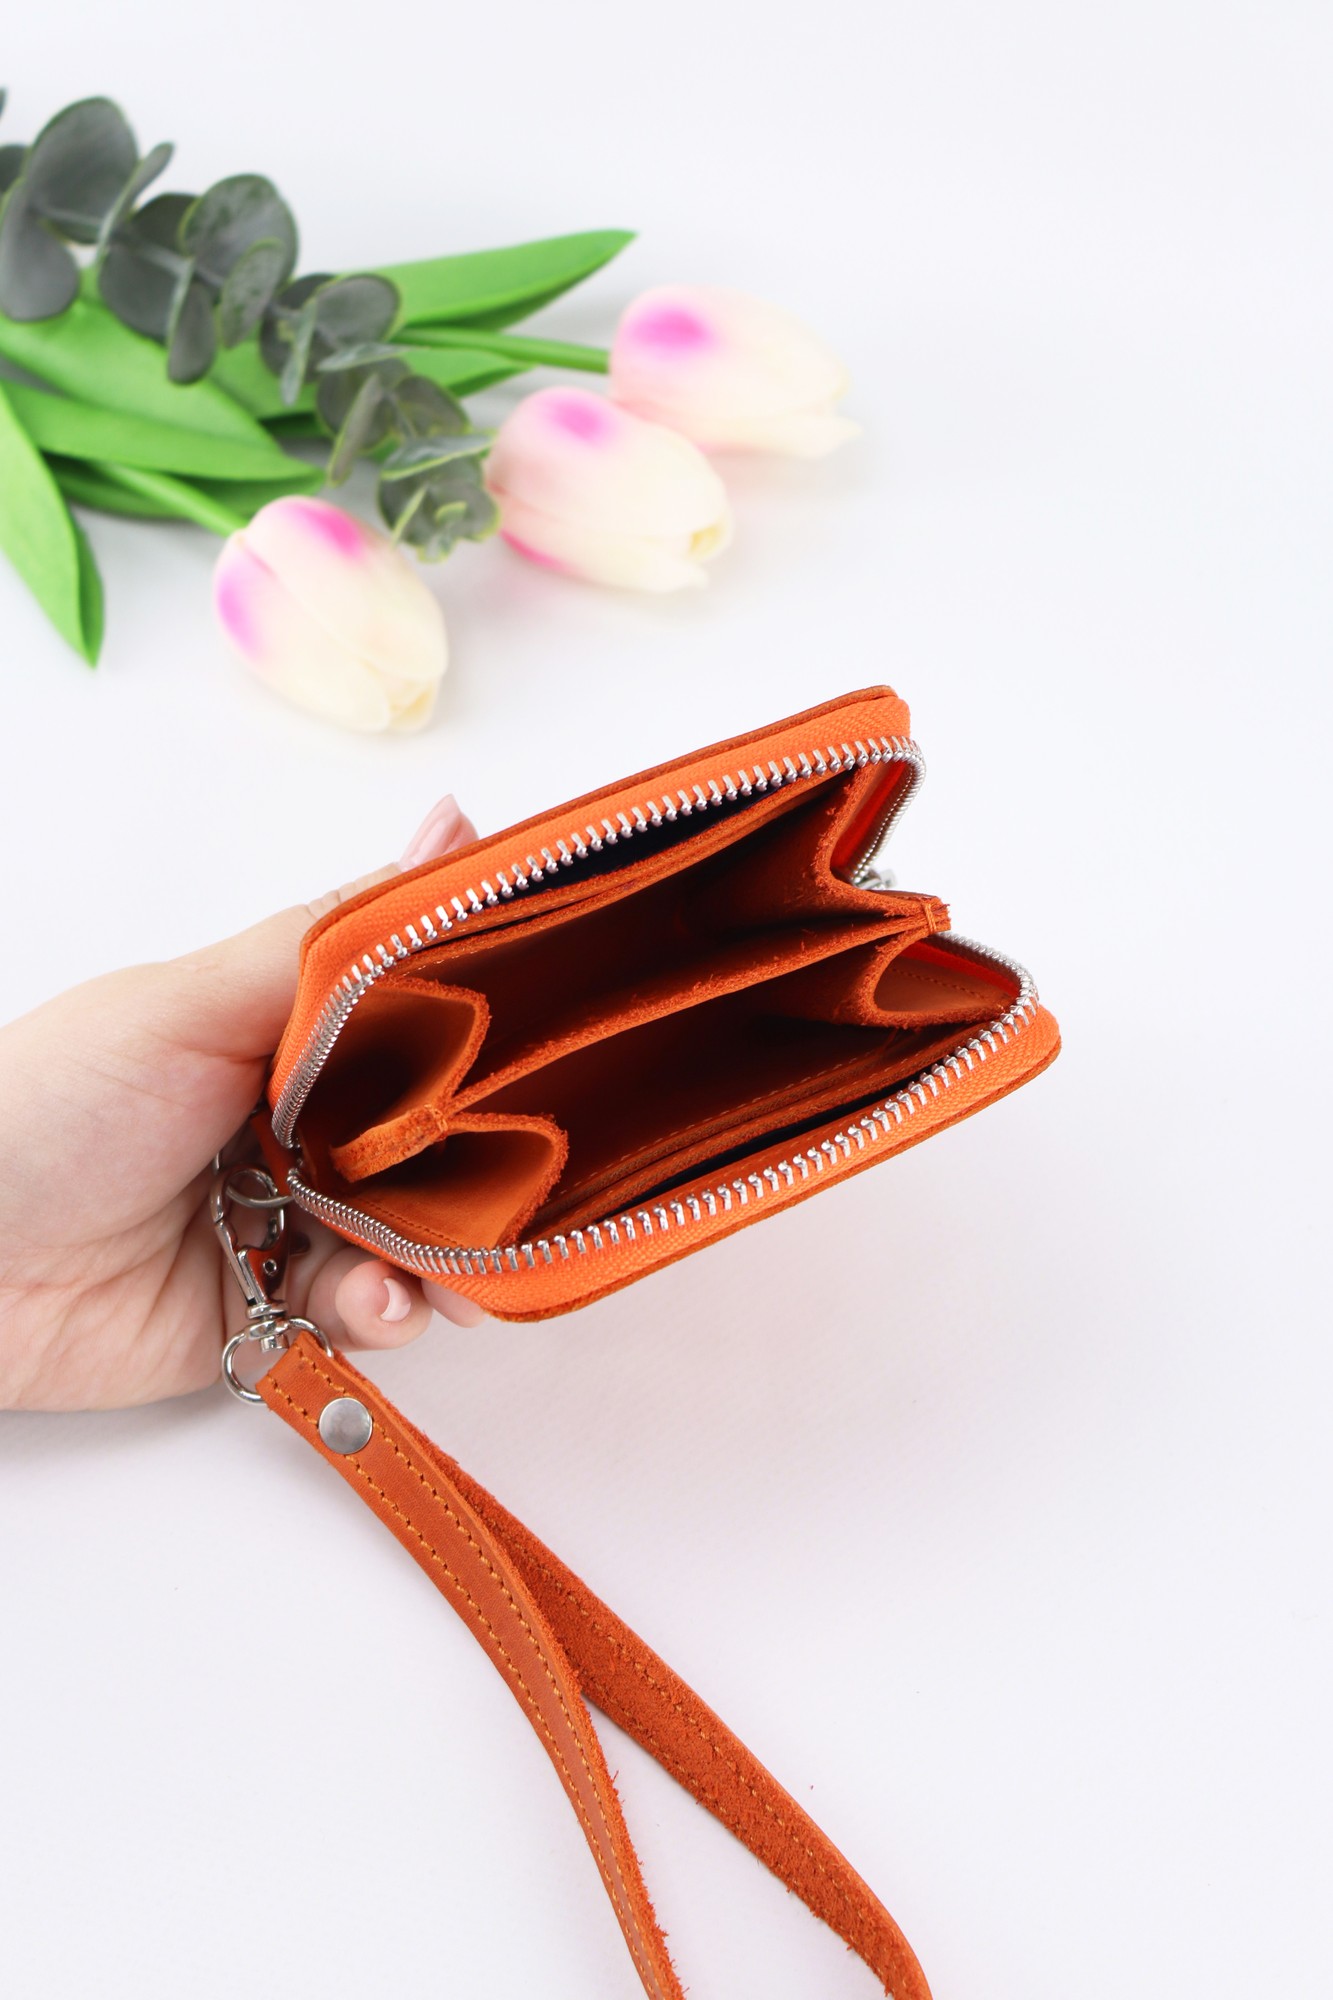 Women's Small Leather Zip Around Wallet with Wrist Strap/ Compact Mini Purse with Hand Strap/ Orange - 03008. Made in Ukraine